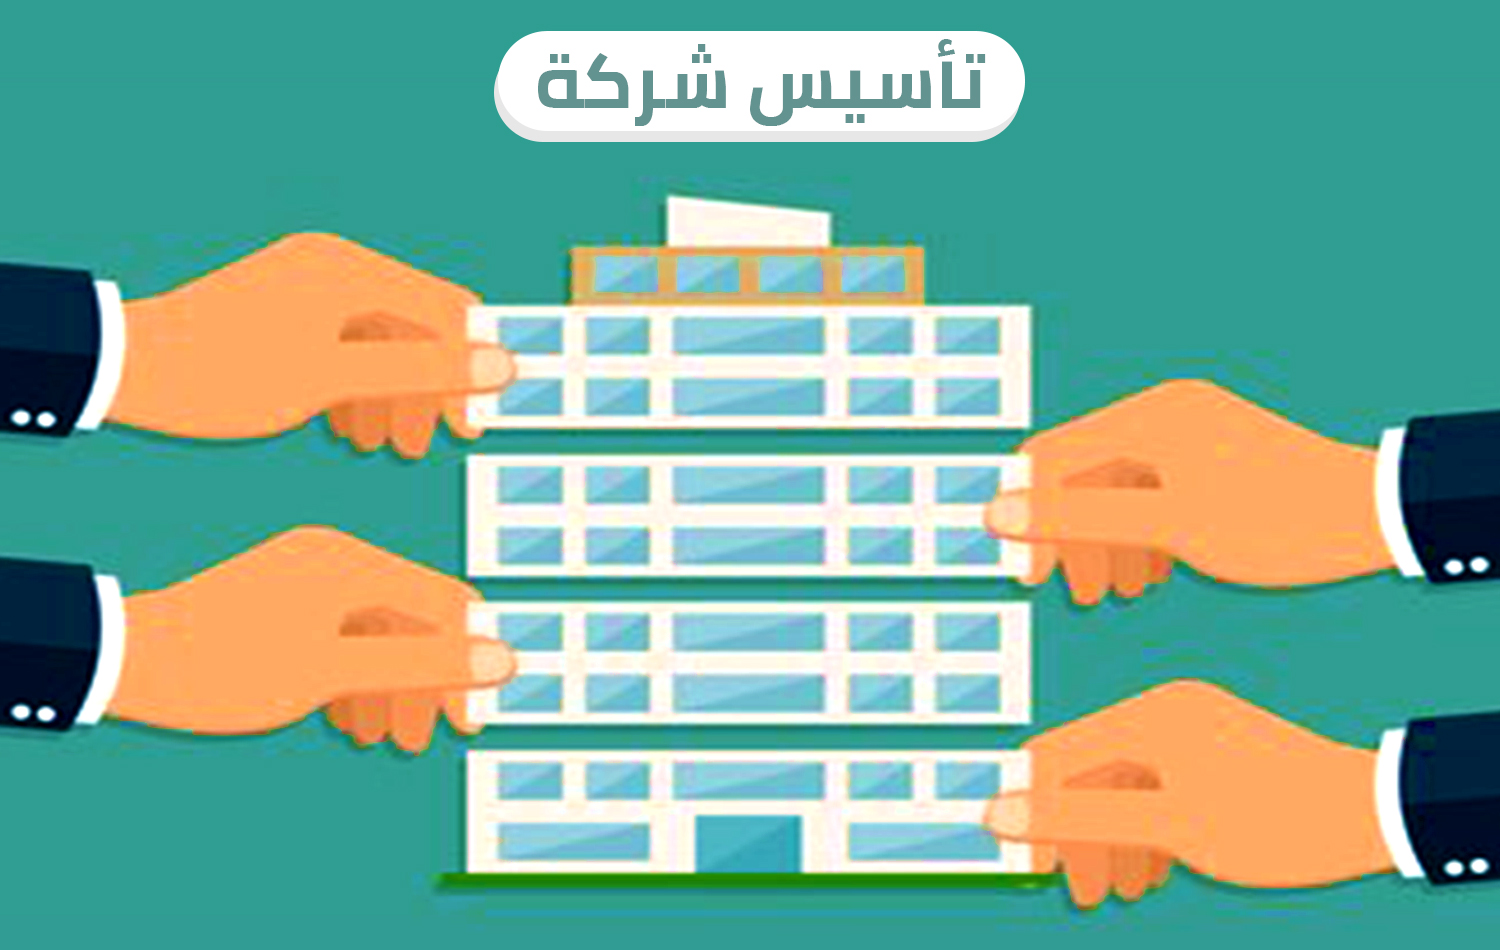 Illustration depicting multiple hands working together to build a company, symbolized by constructing a building. The text at the top in Arabic reads "تأسيس شركة," which translates to "Establishing a Company." The image conveys the collaborative effort required in starting and building a business.